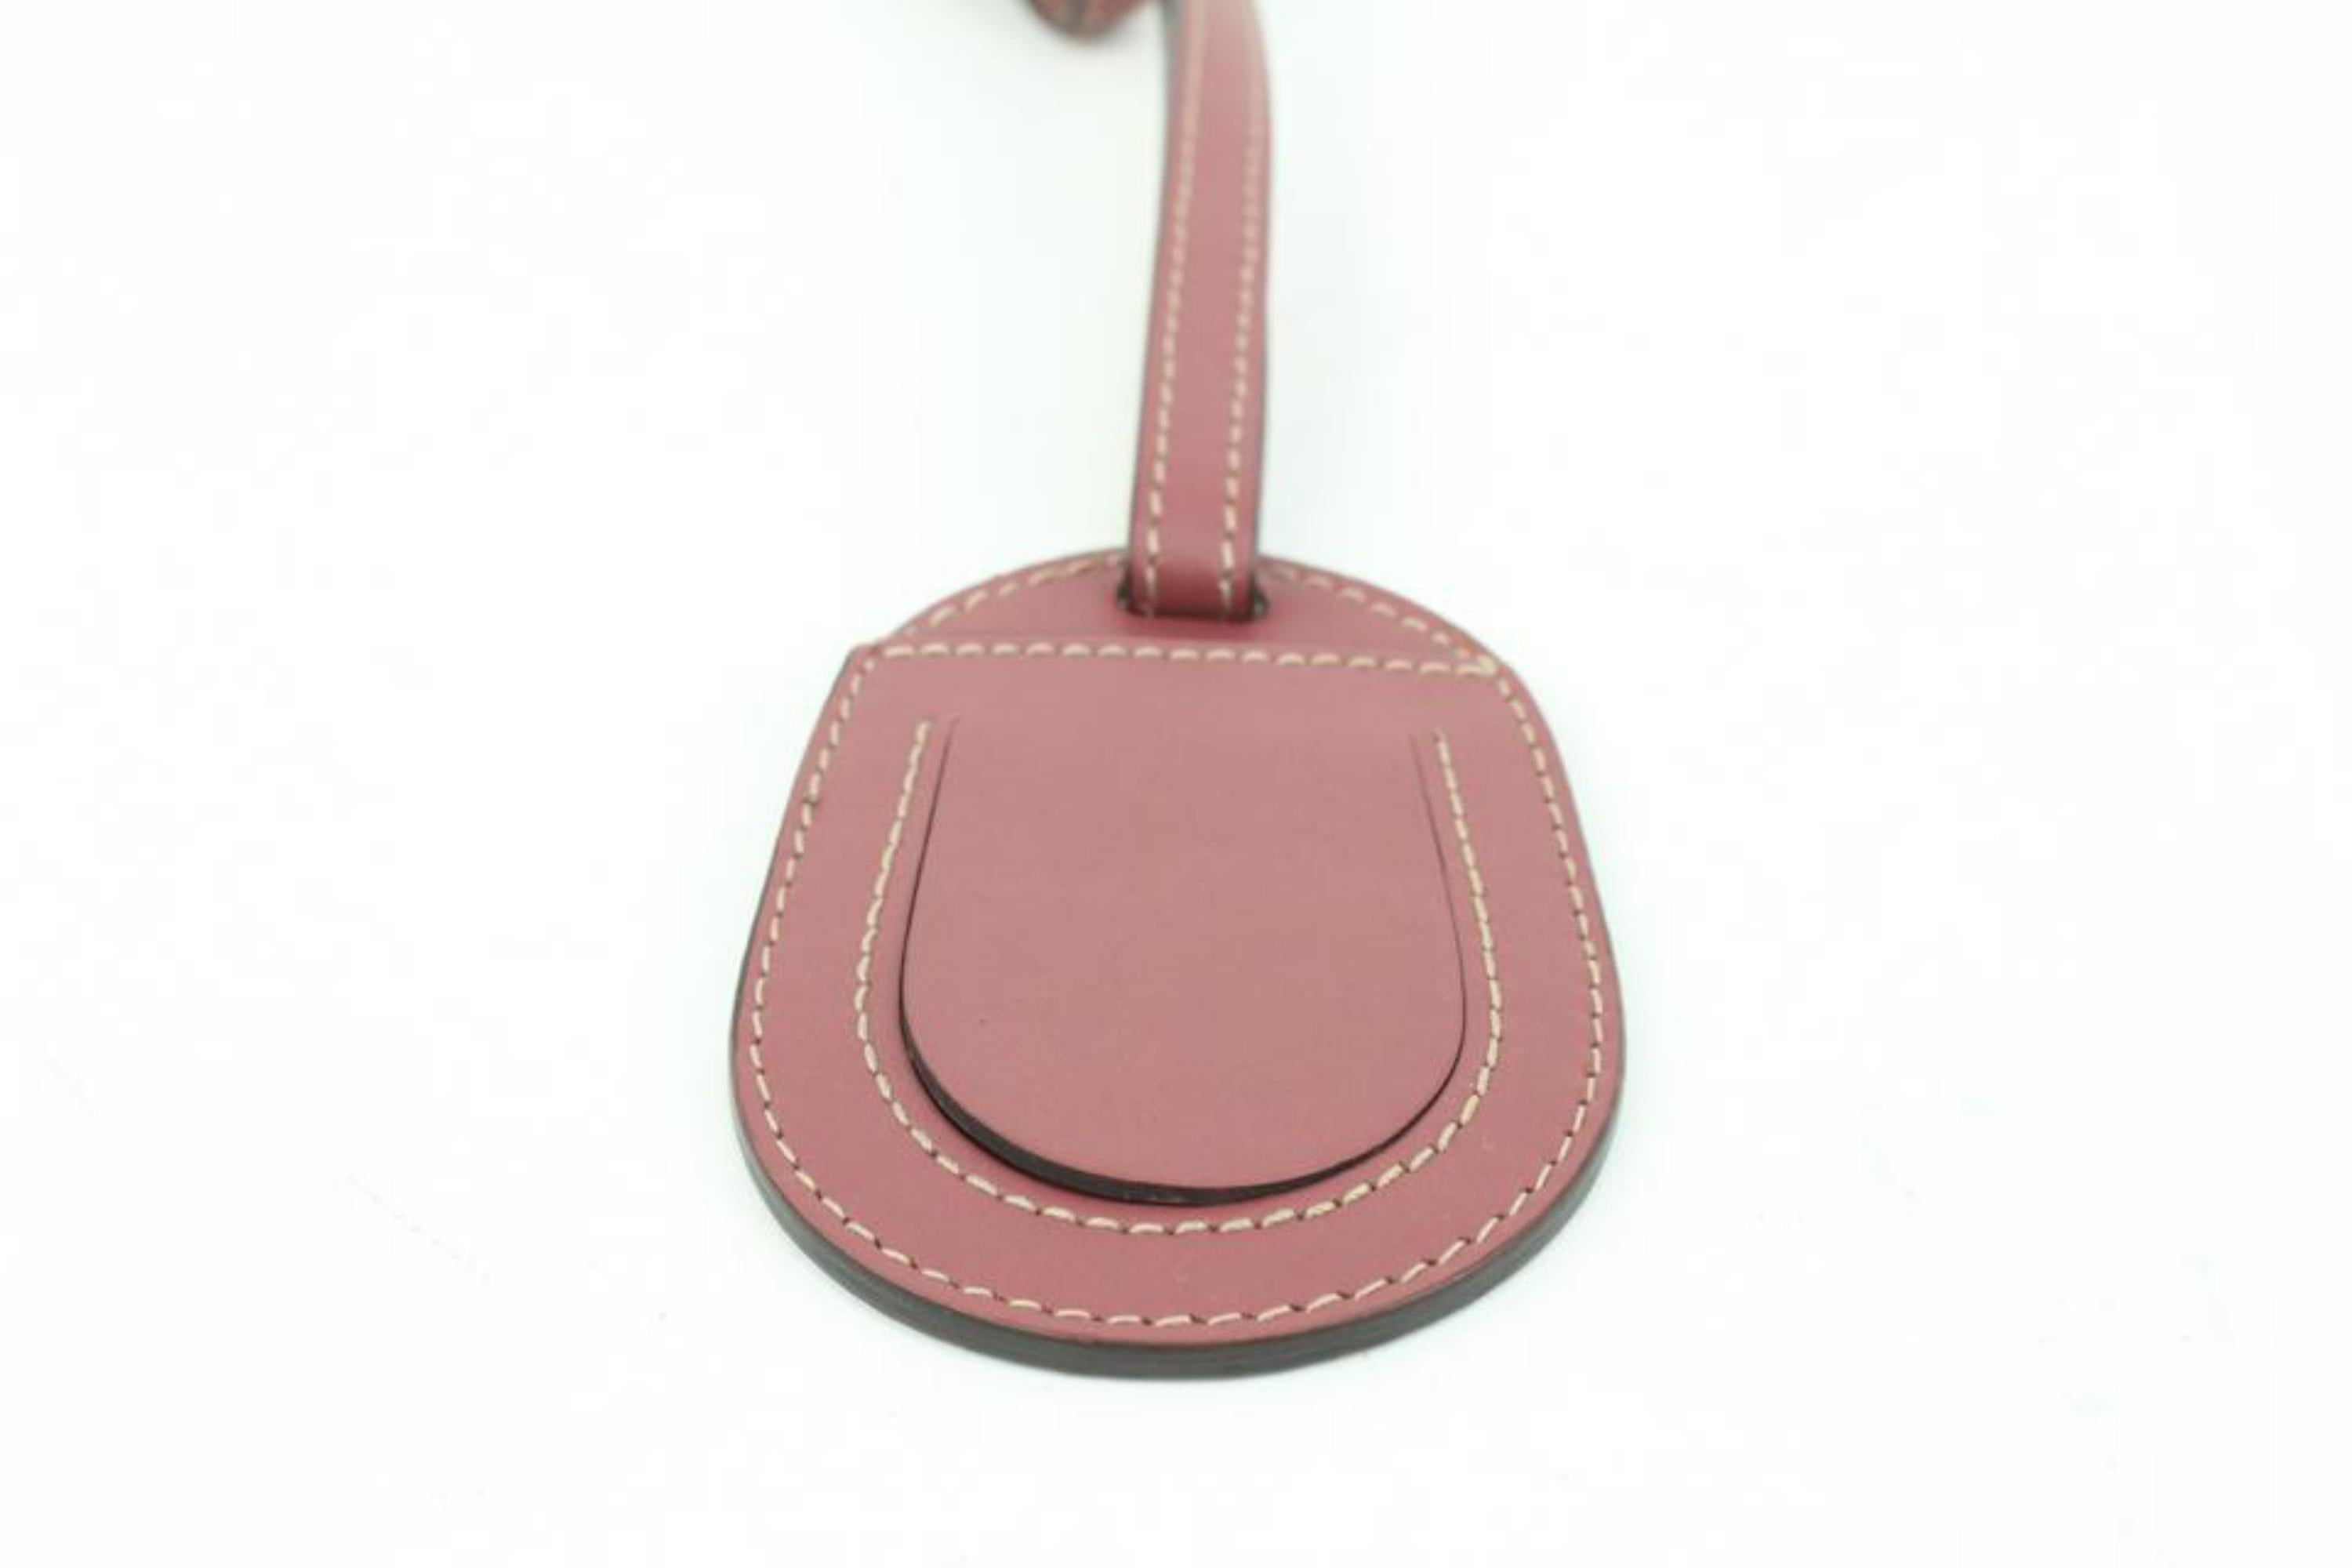 Gucci Mauve Clochette Luggage Tag from Reversible Supreme GG Tote 44g85
Made In: Italy
Measurements: Length:  2.4